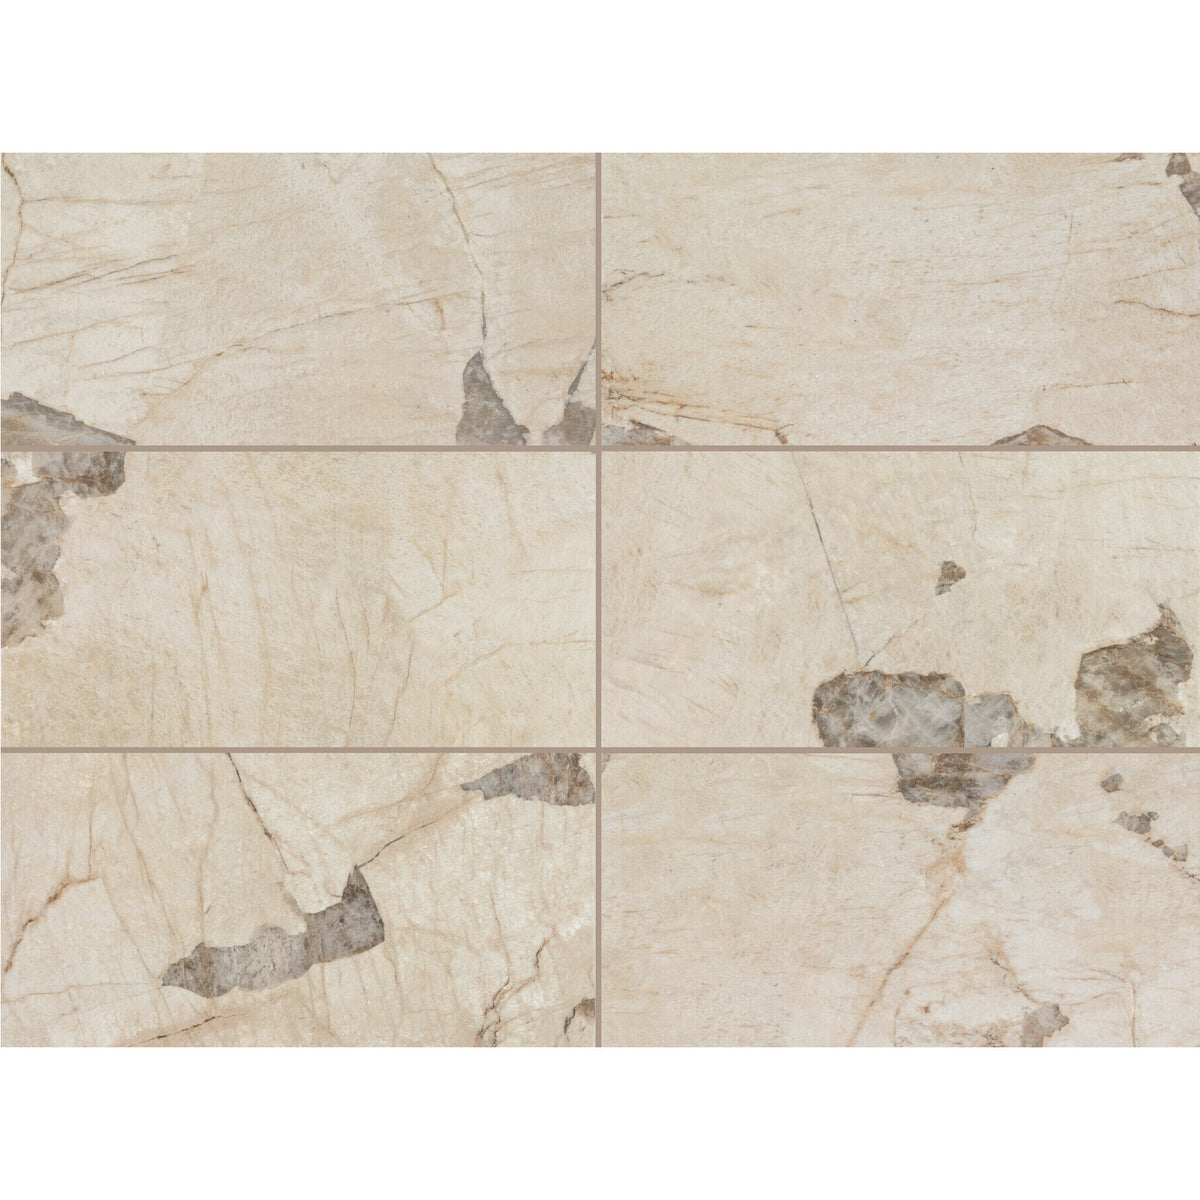 Marazzi - Savoir - 24 in. x 48 in. Colorbody Porcelain Tile - Pierre Polished Variation